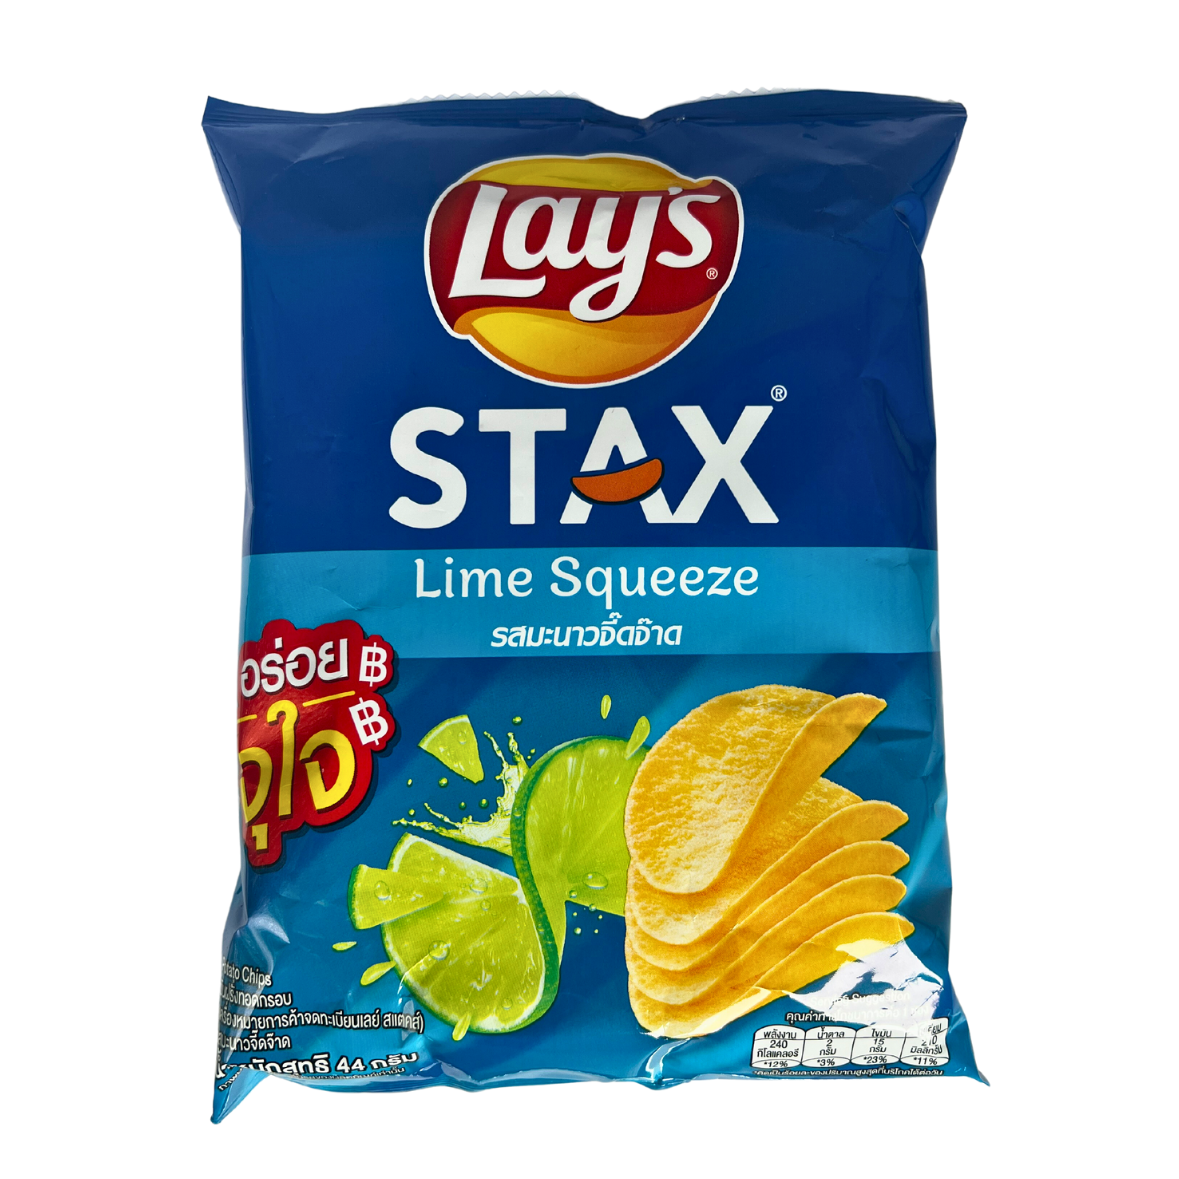 Lay's Stax Lime Squeeze